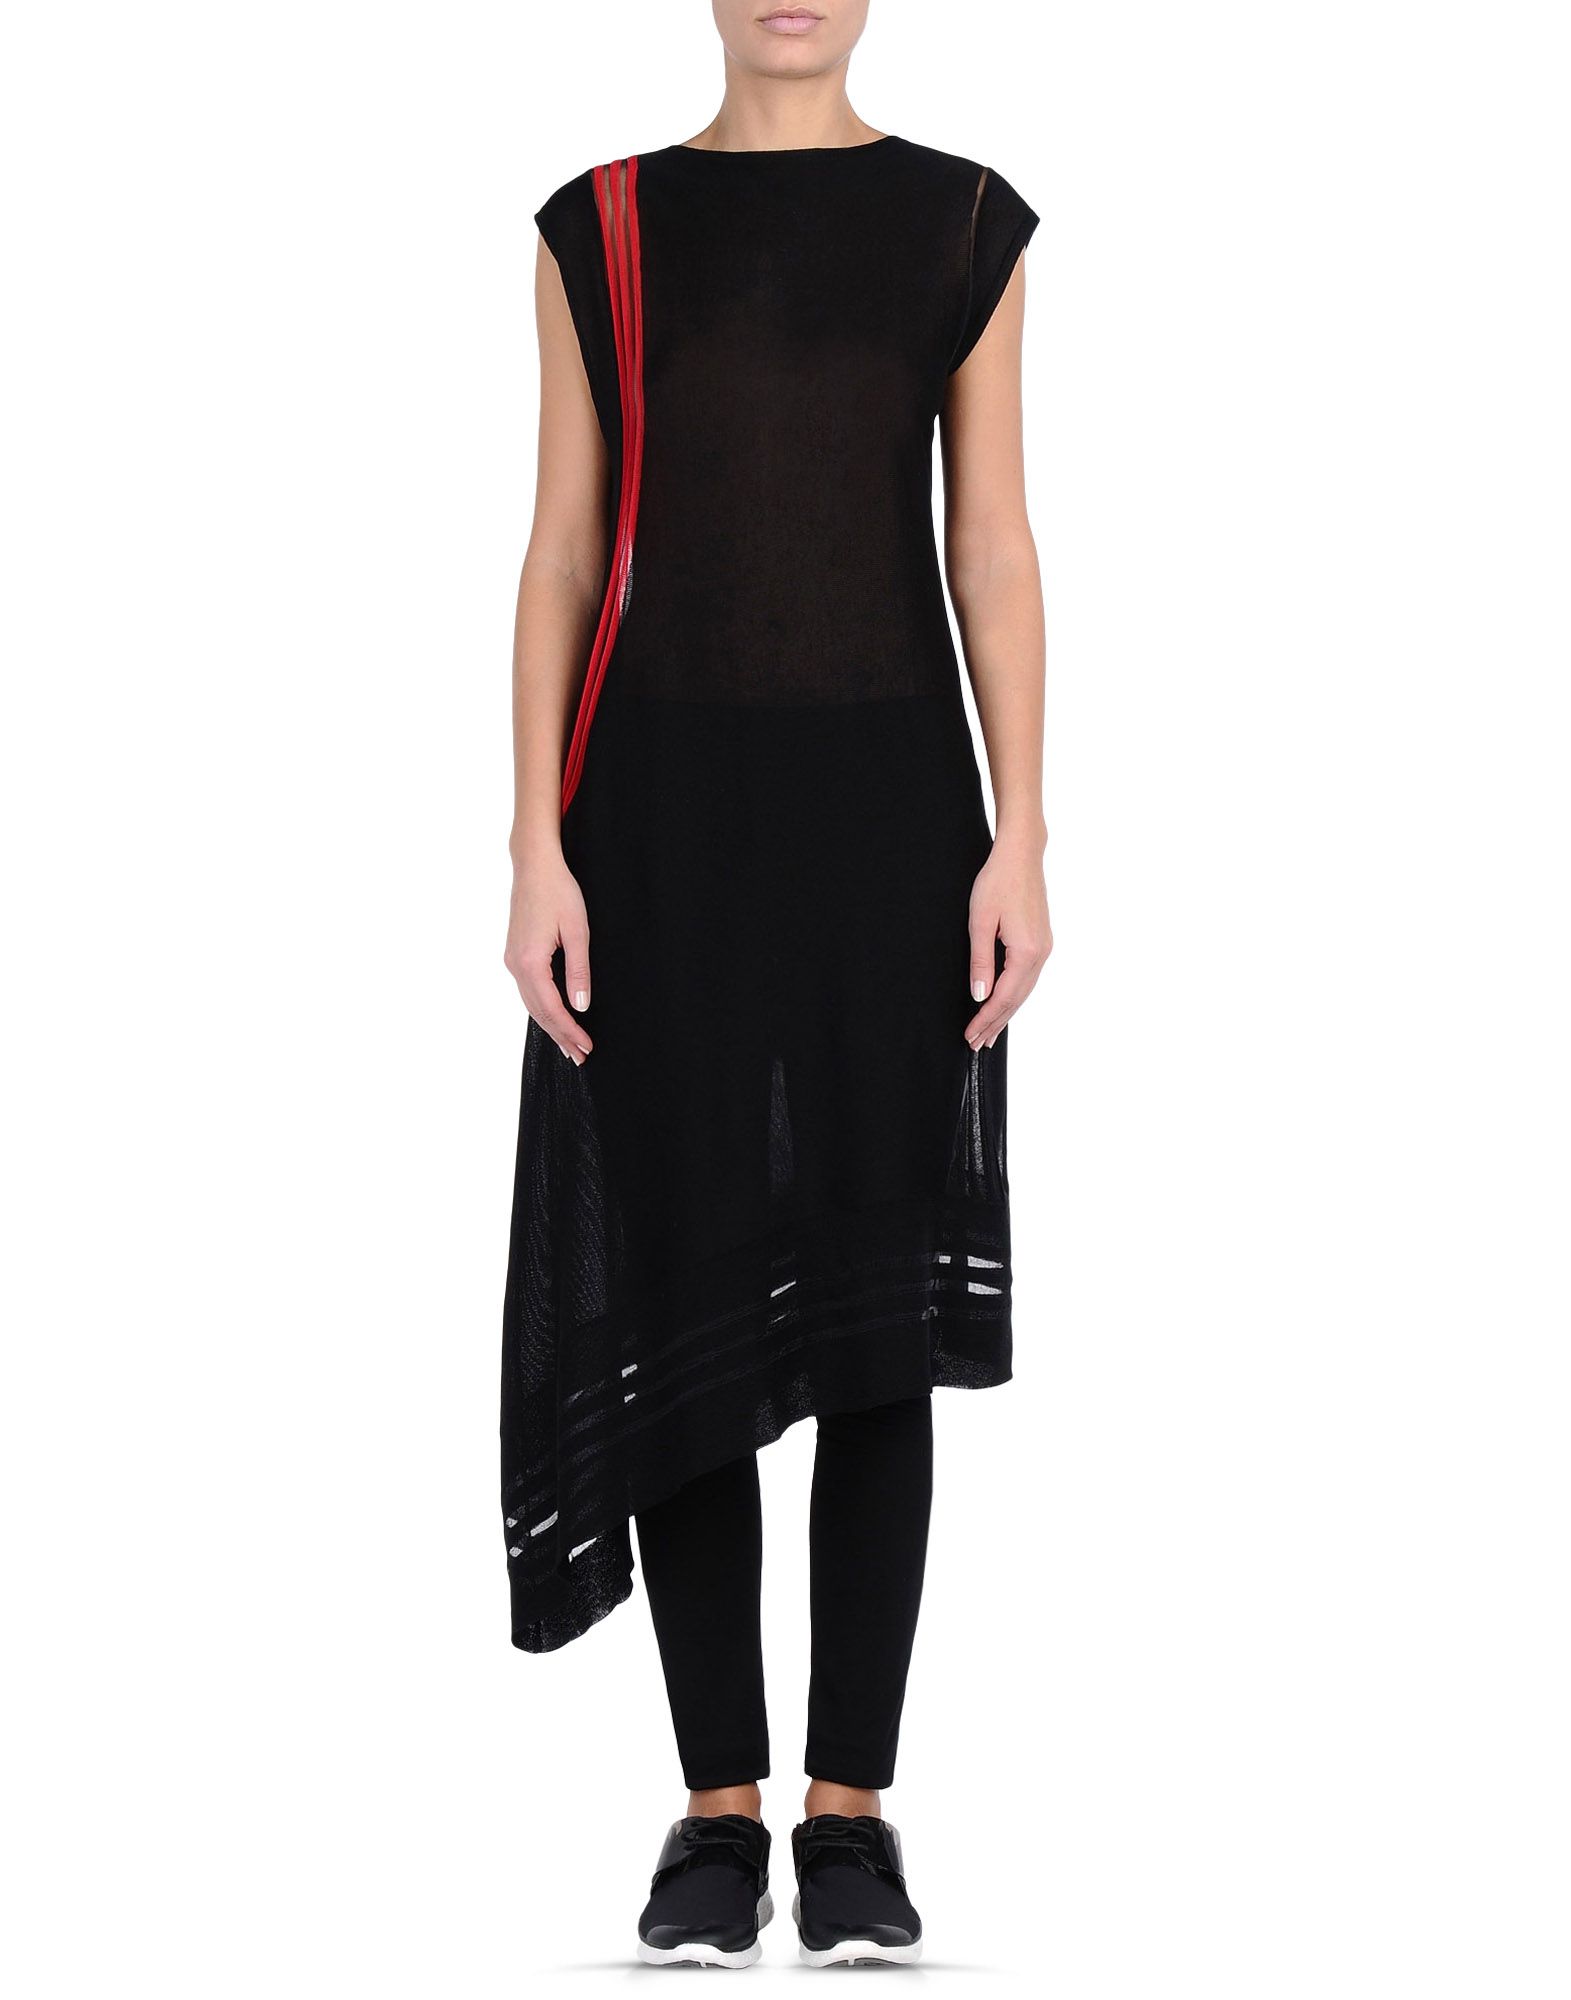 Y 3 KNIT TUNIC for Women | Adidas Y-3 Official Store